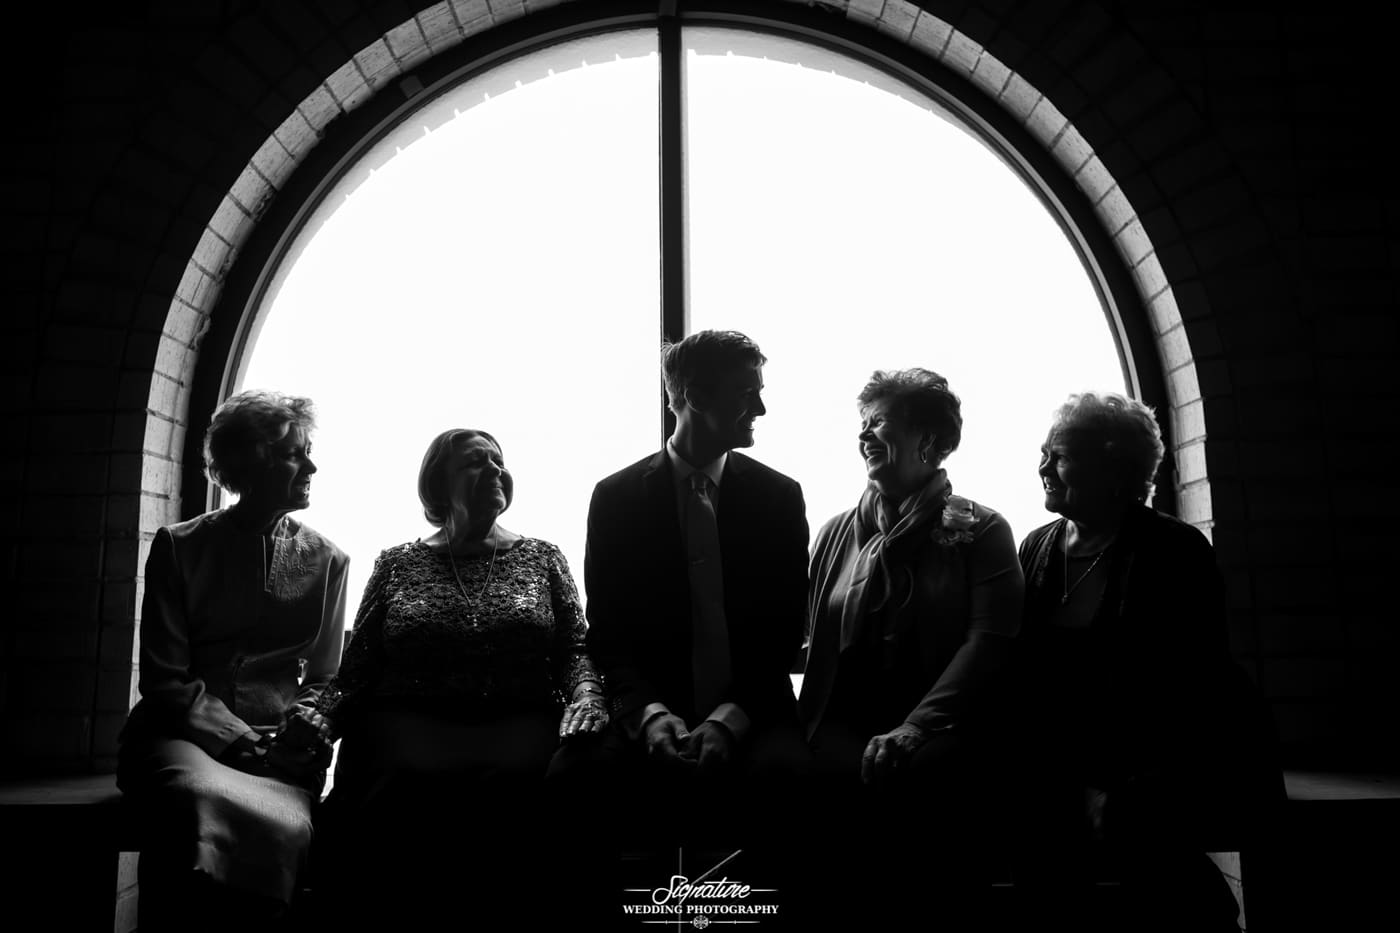 Groom with matriarchs sitting in window black and white silhouette